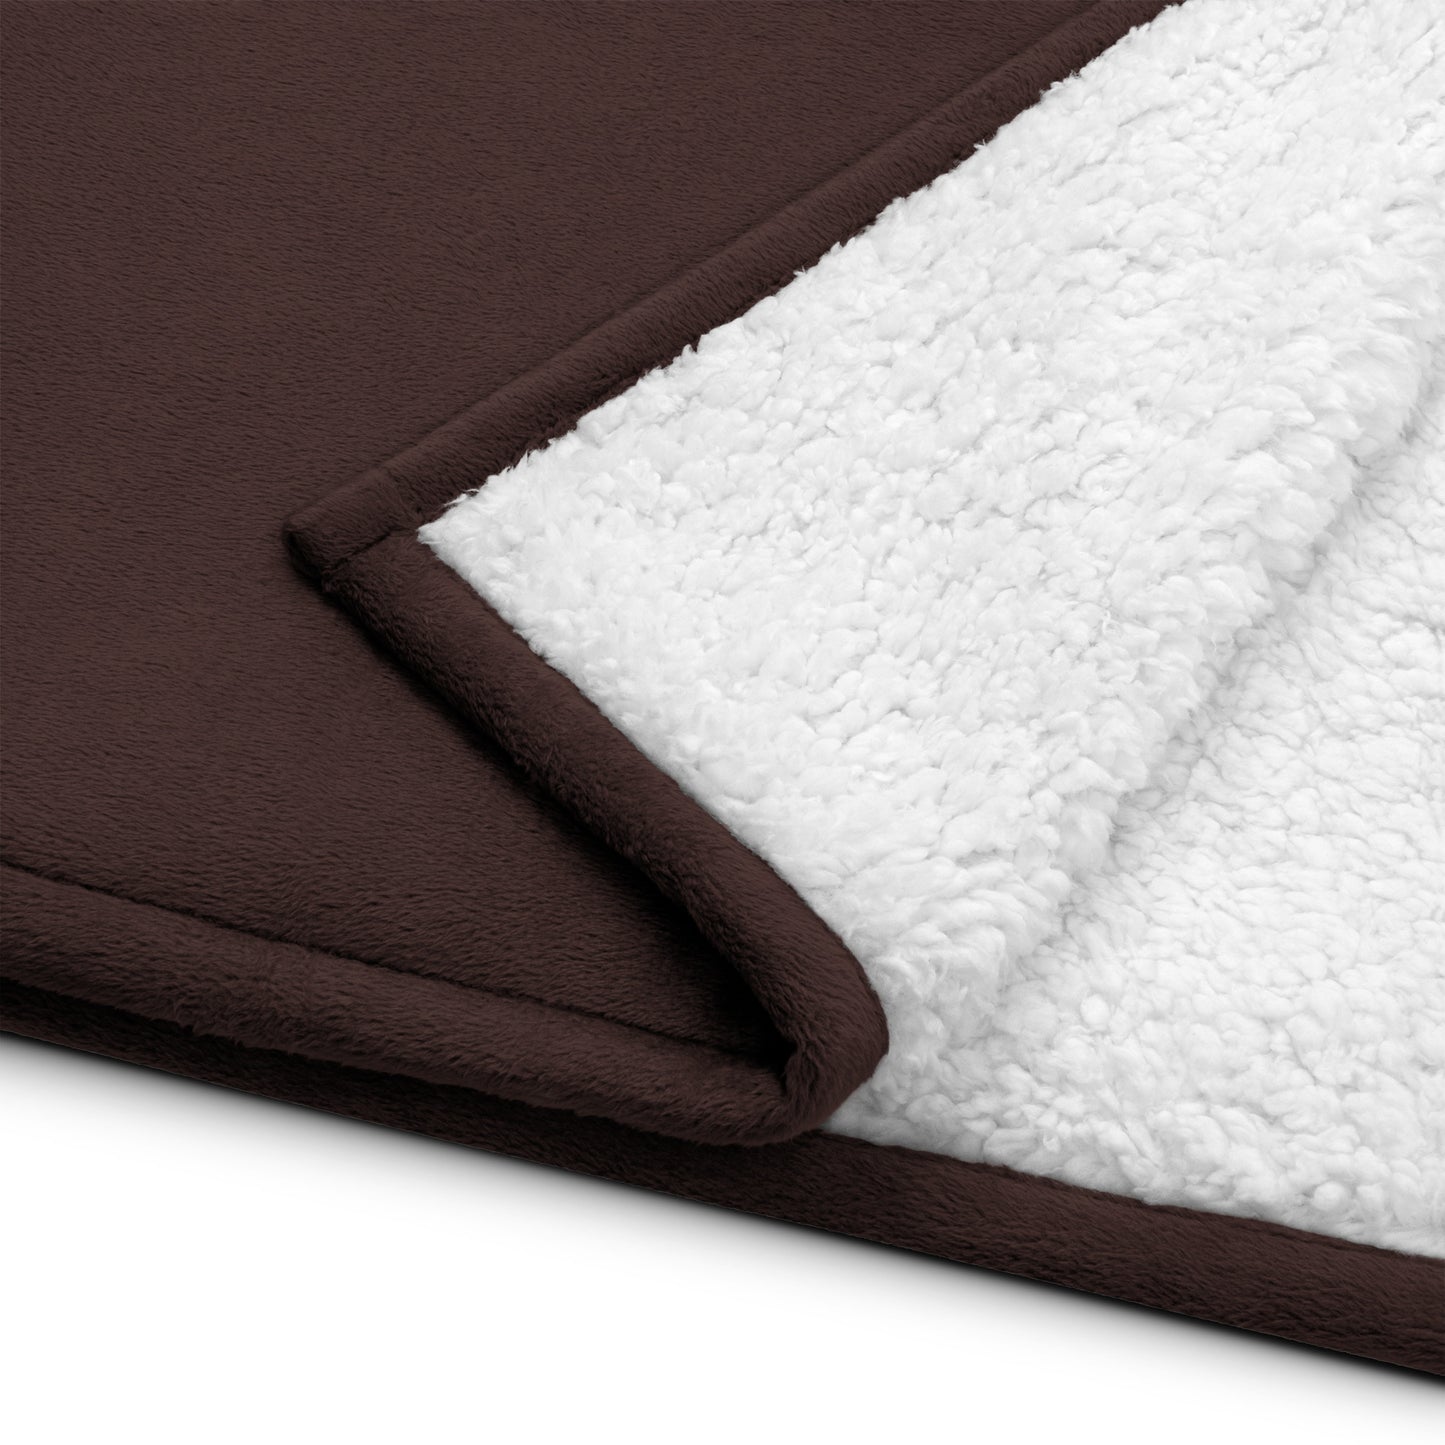 Premium sherpa blanket - Can you reach that for me?